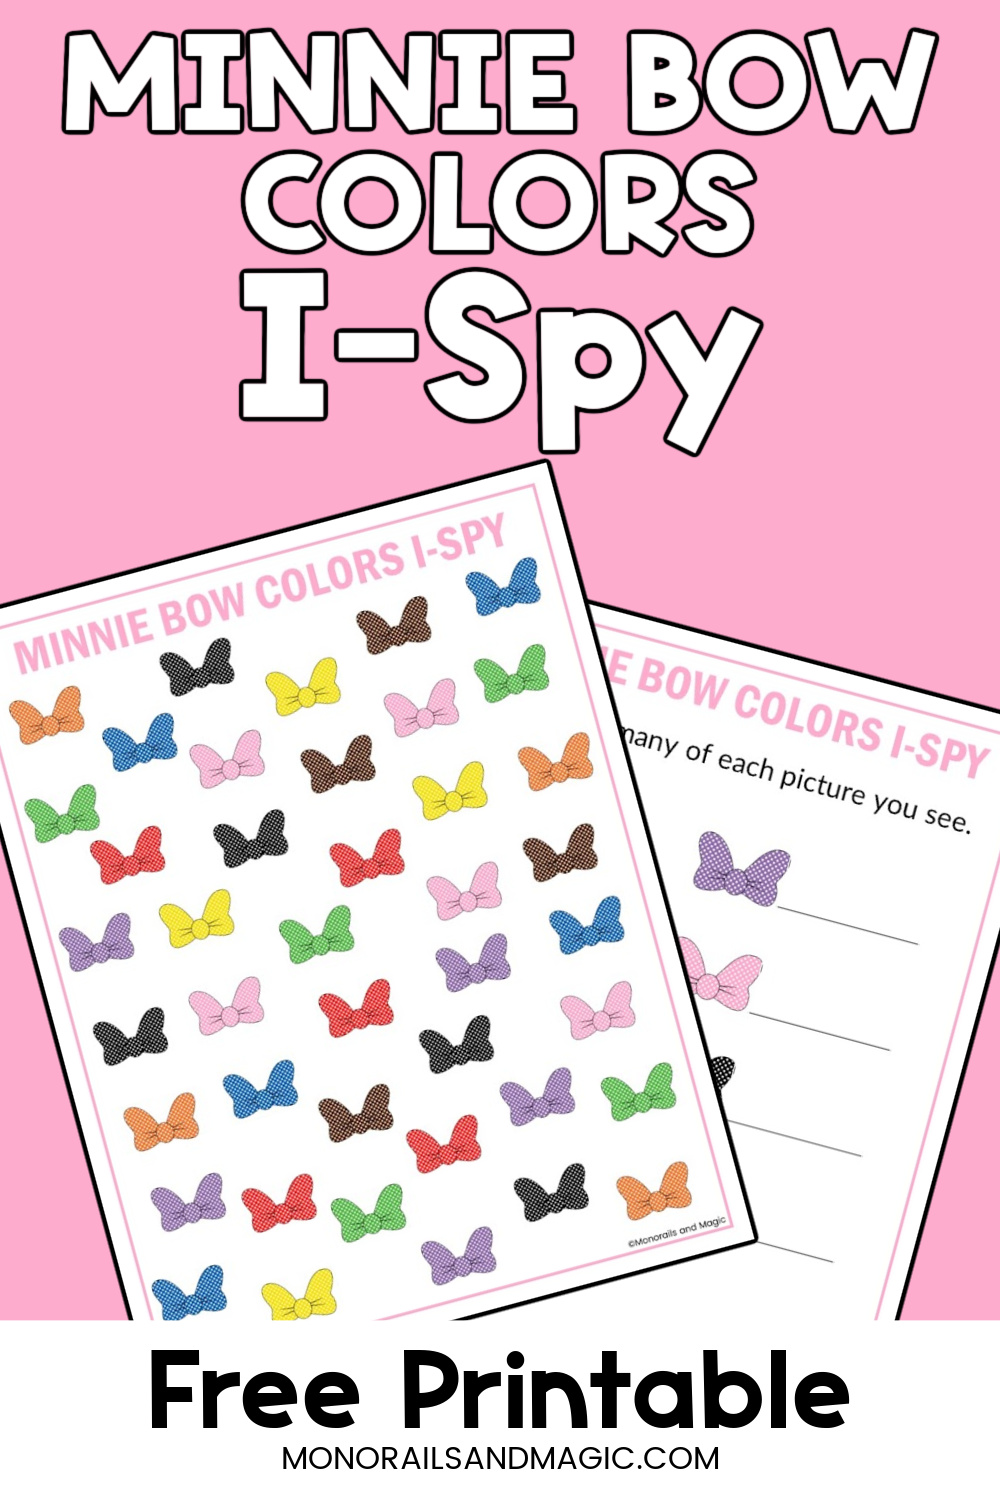 Free printable Minnie bow colors I-spy activity for kids.